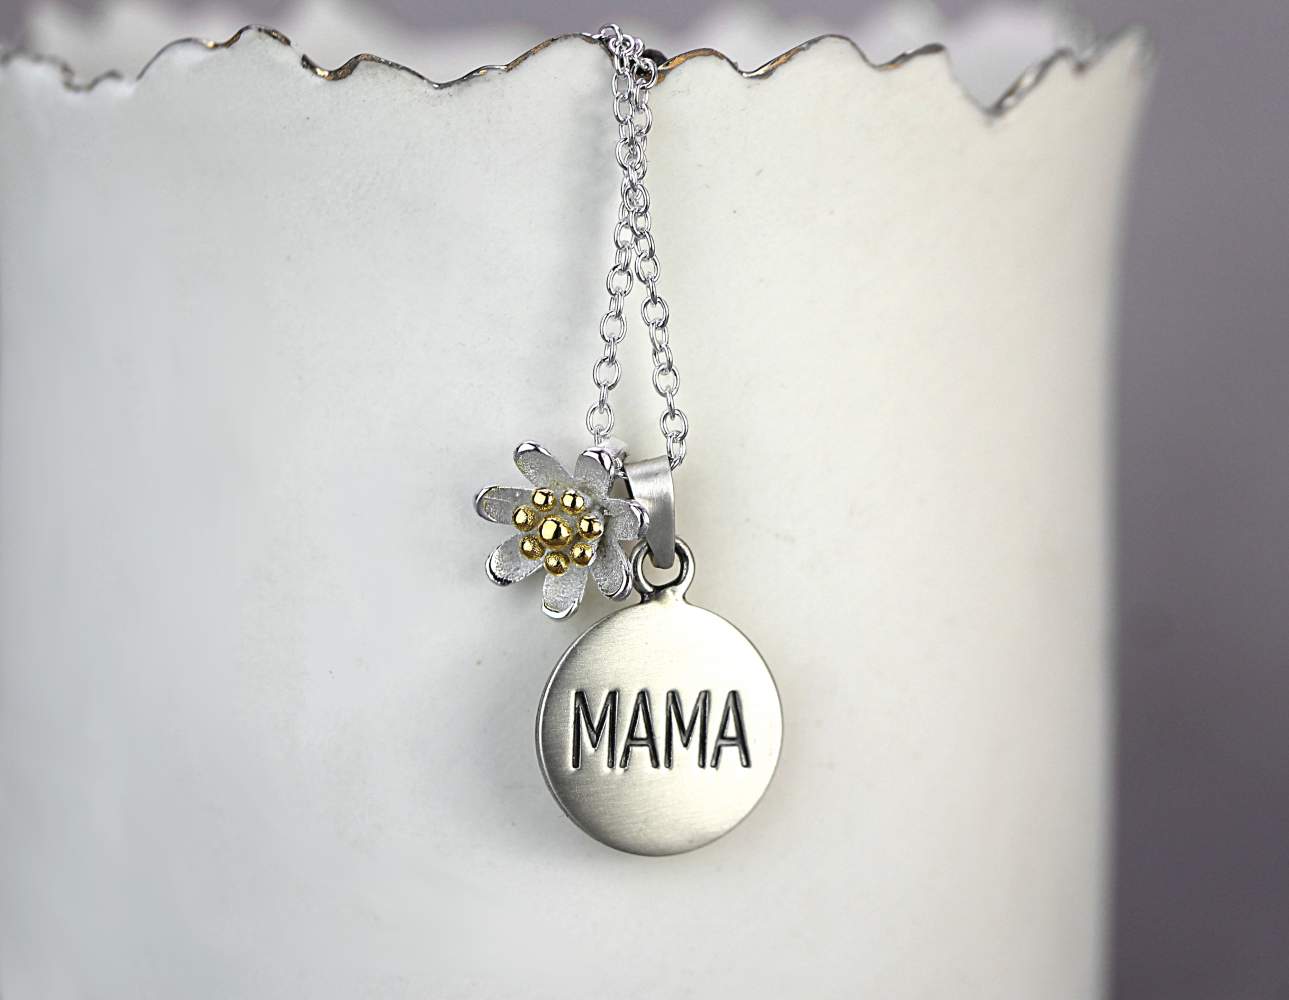 Silver necklace with engraved MAMA pendant and little flower